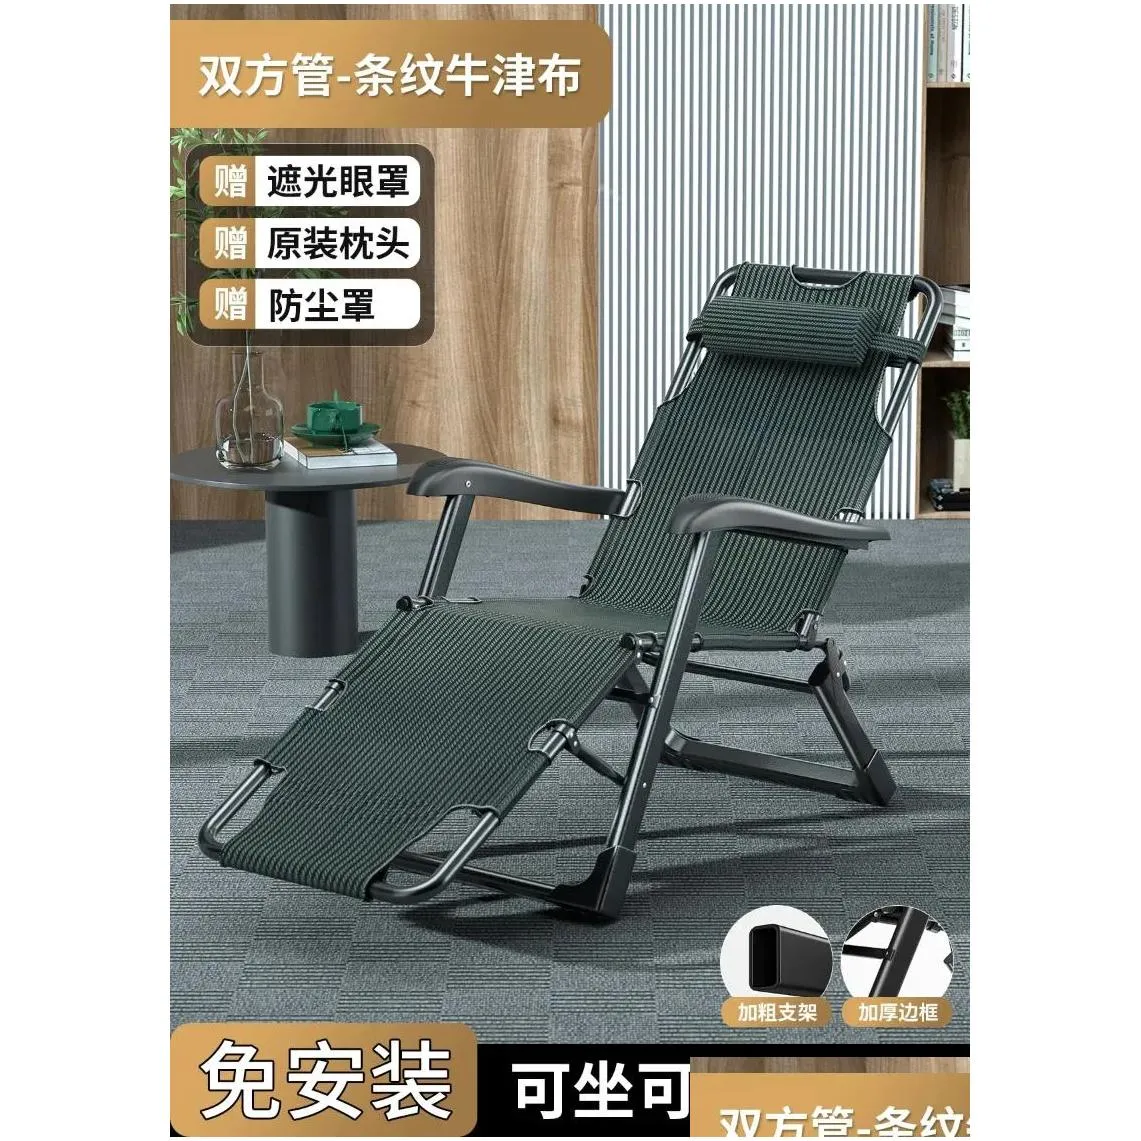 Camp Furniture Living Room Luxury Recliner Office Chair Metal Nook Industrial Unique Camping Minimalist Poltrona Relax Modern